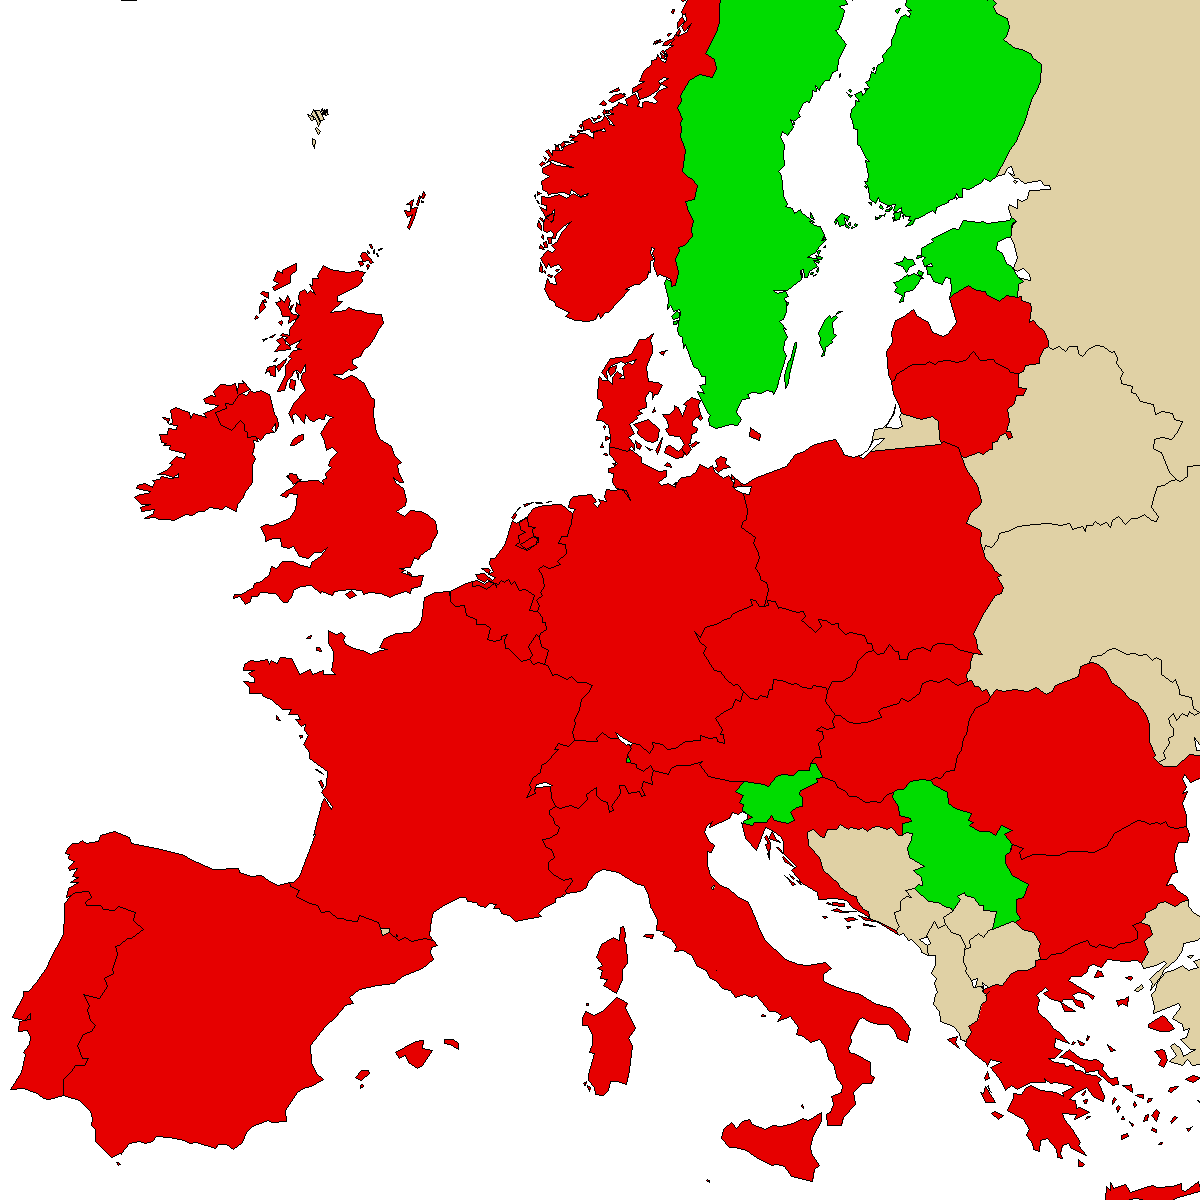 legal info map for our product hex-en, green are countries where we found no ban, red with ban, grey is unknown